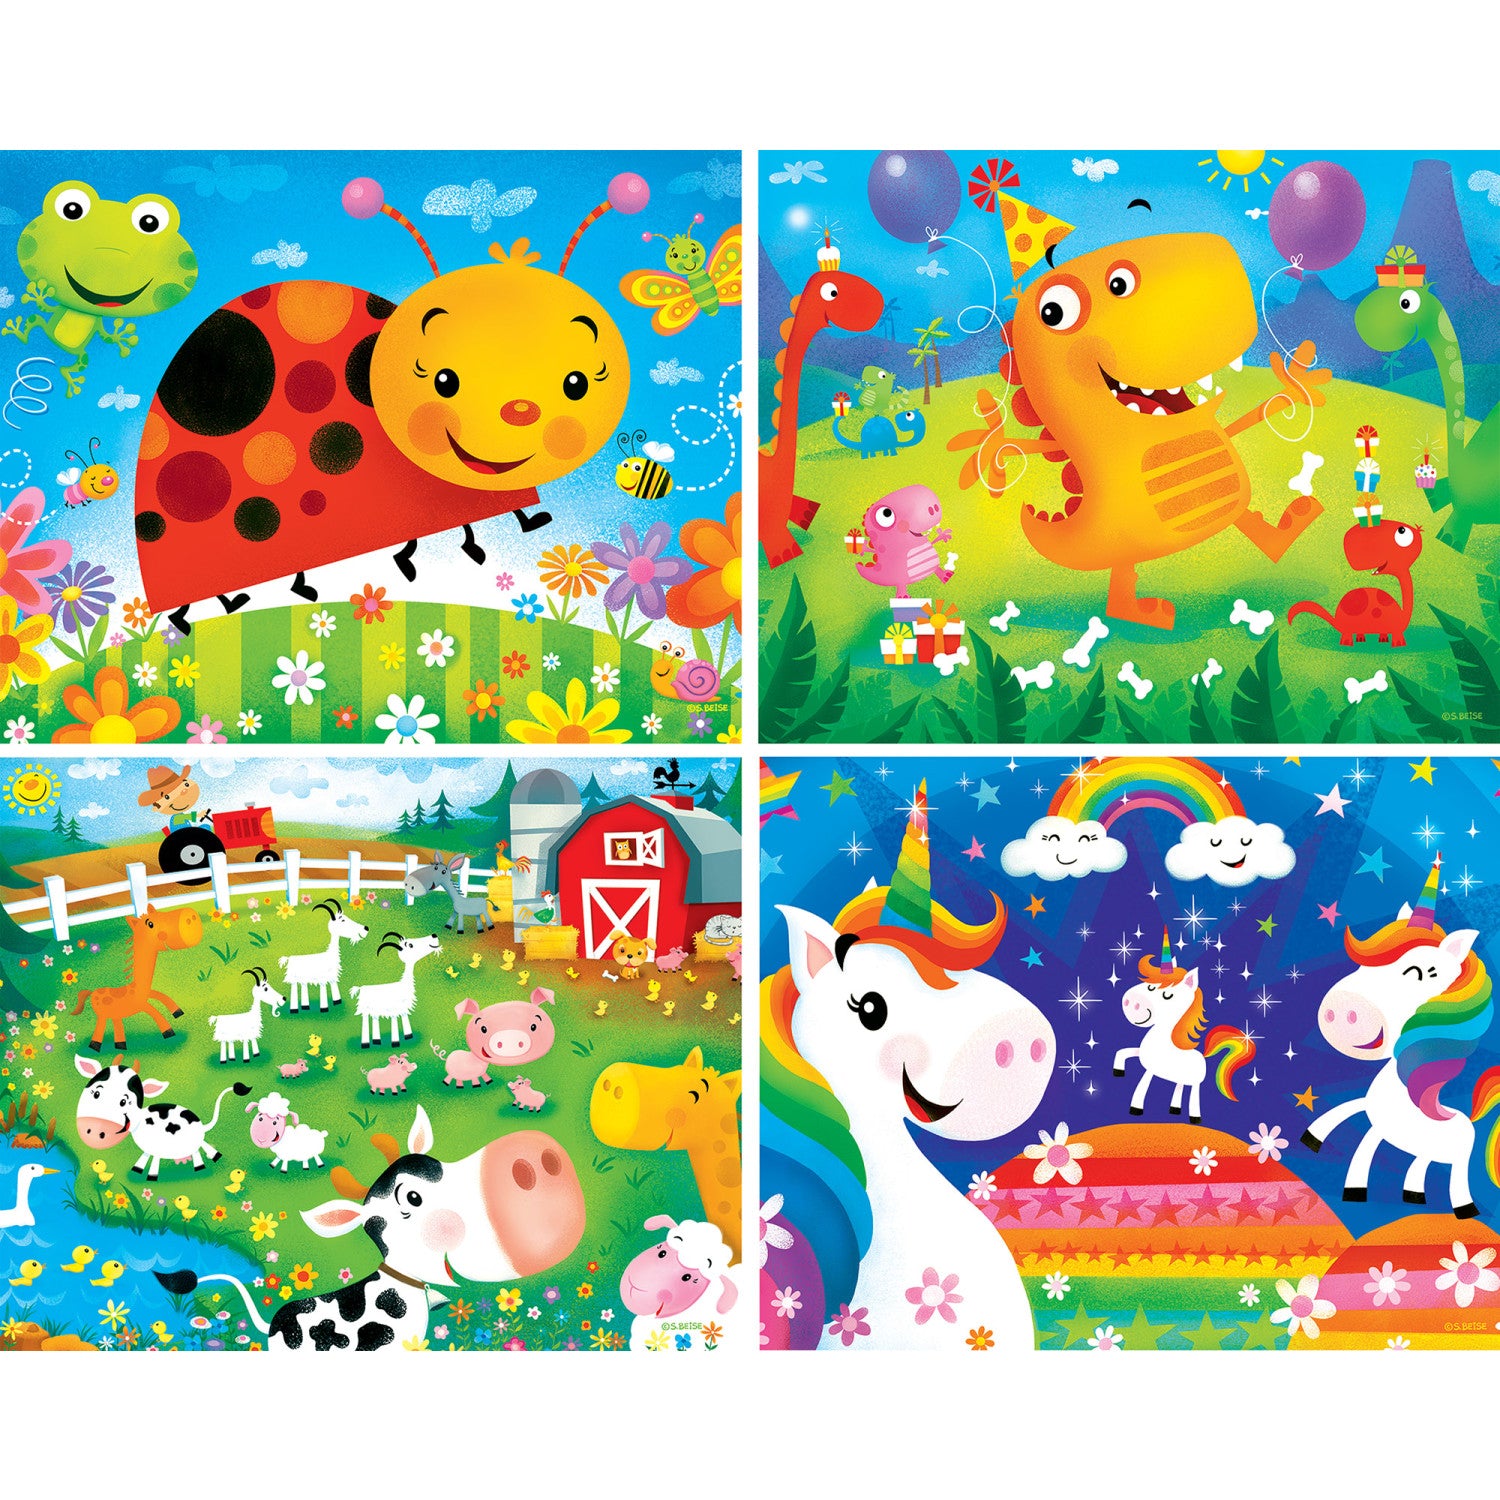 4 Pack of Jigsaw Puzzles - 48, 72, and 100 Pieces